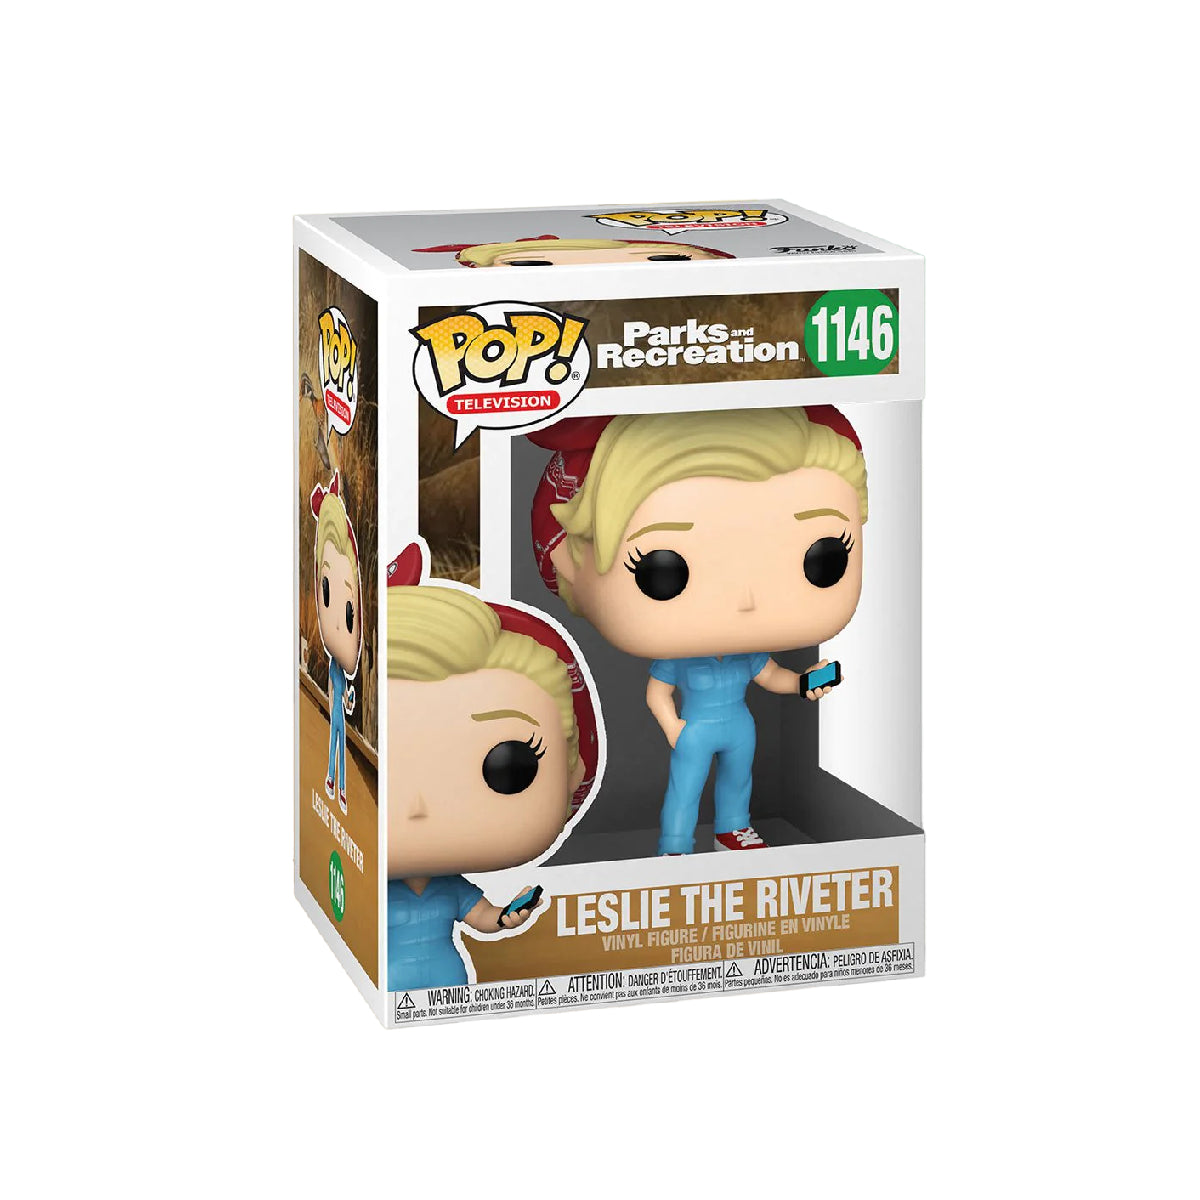 Consigue tu Funko Pop Tv Parks And Recreation Leslie The Riveter